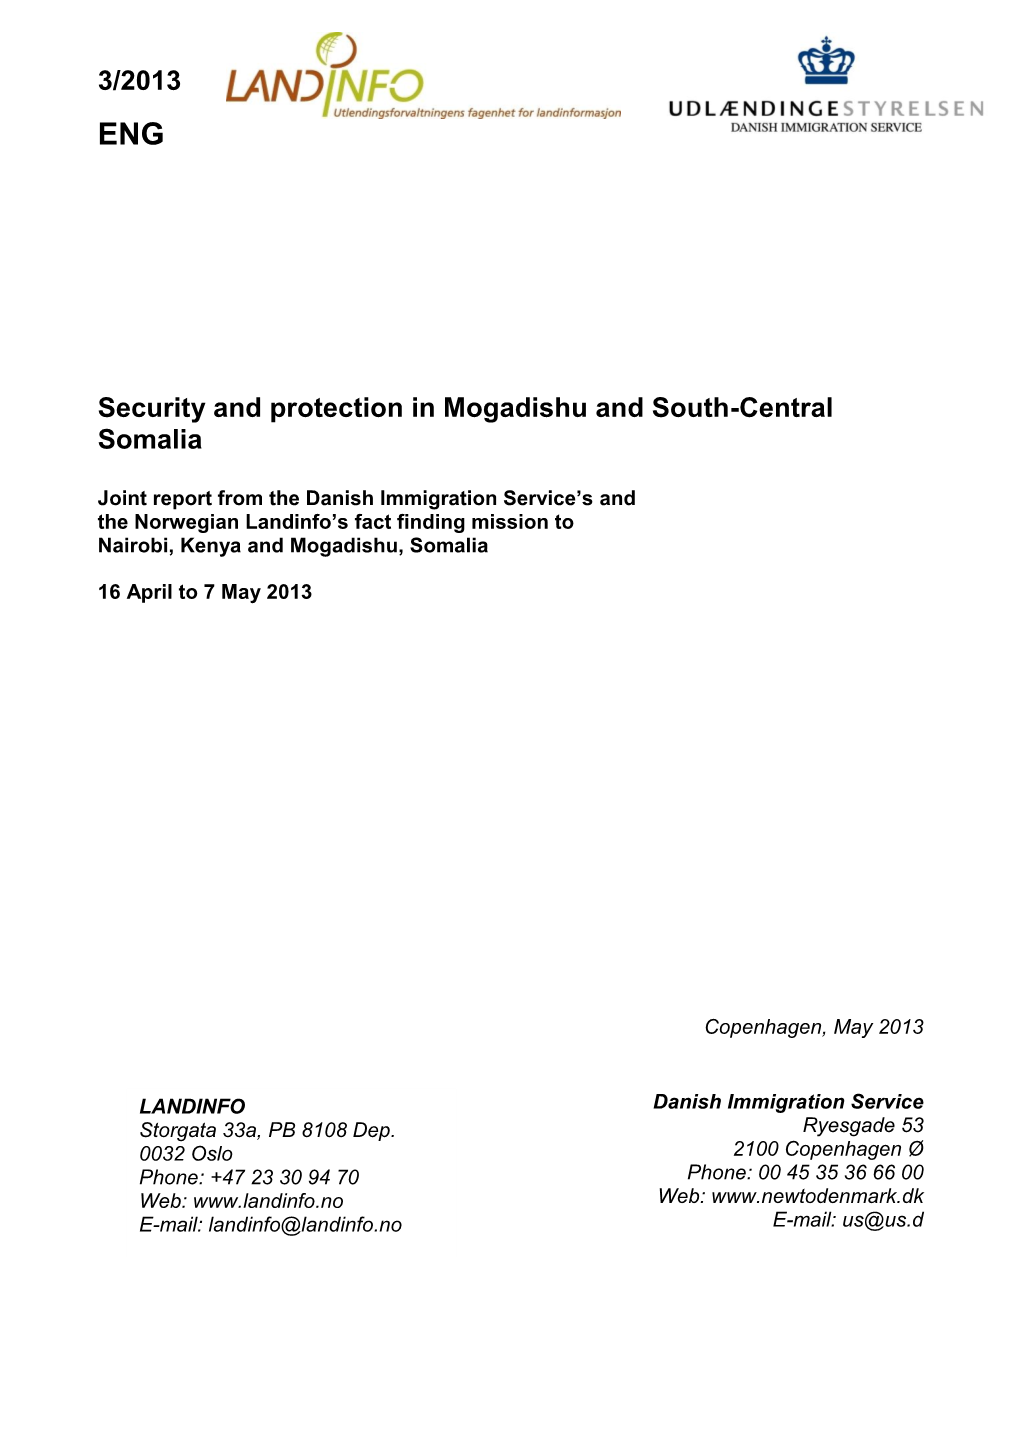 3/2013 Security and Protection in Mogadishu and South-Central Somalia